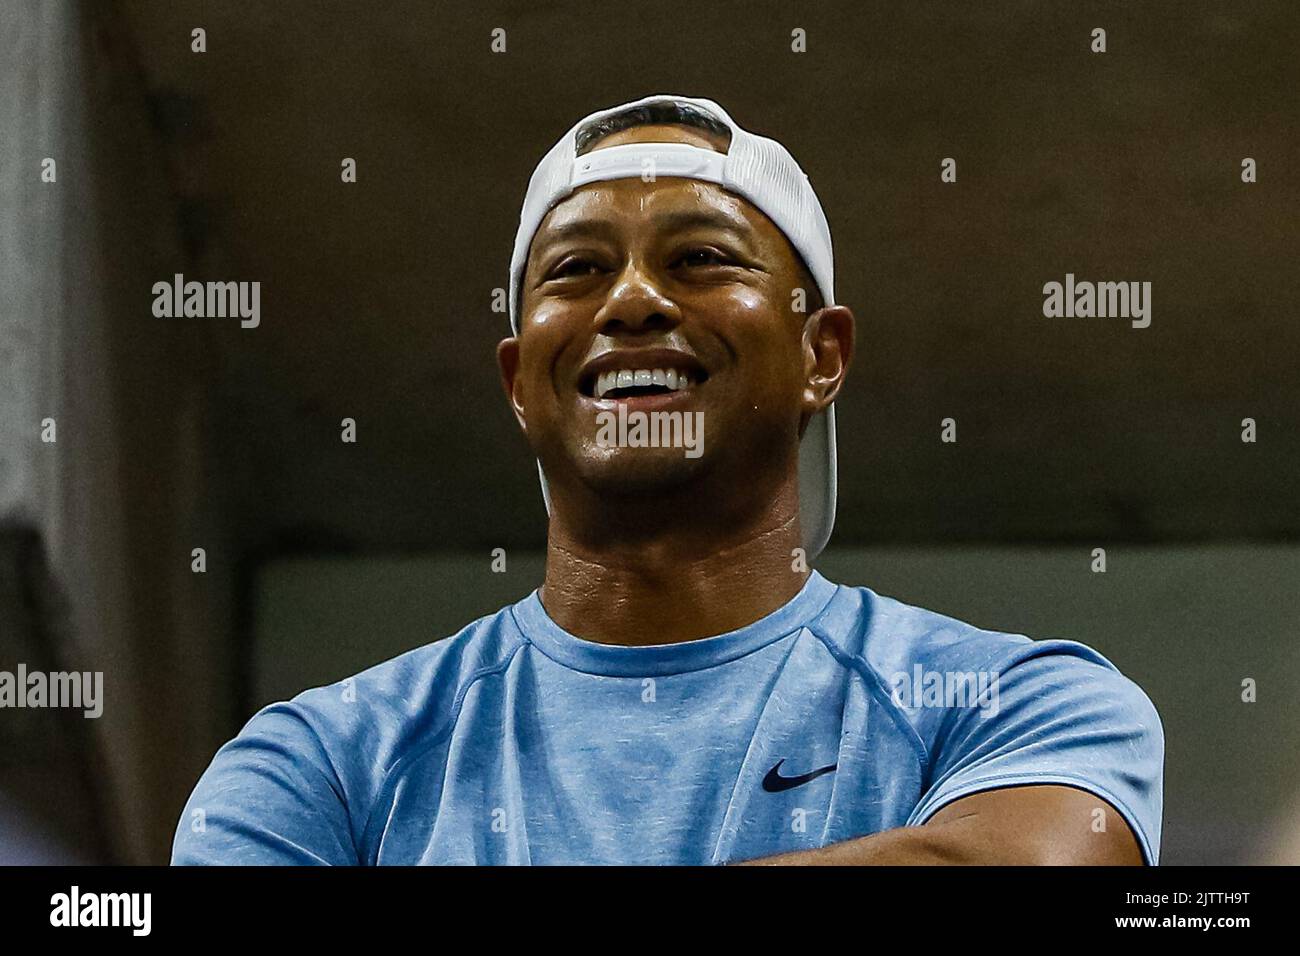 Tiger Woods watching Serena Williams at US Open 2019 Stock Photo